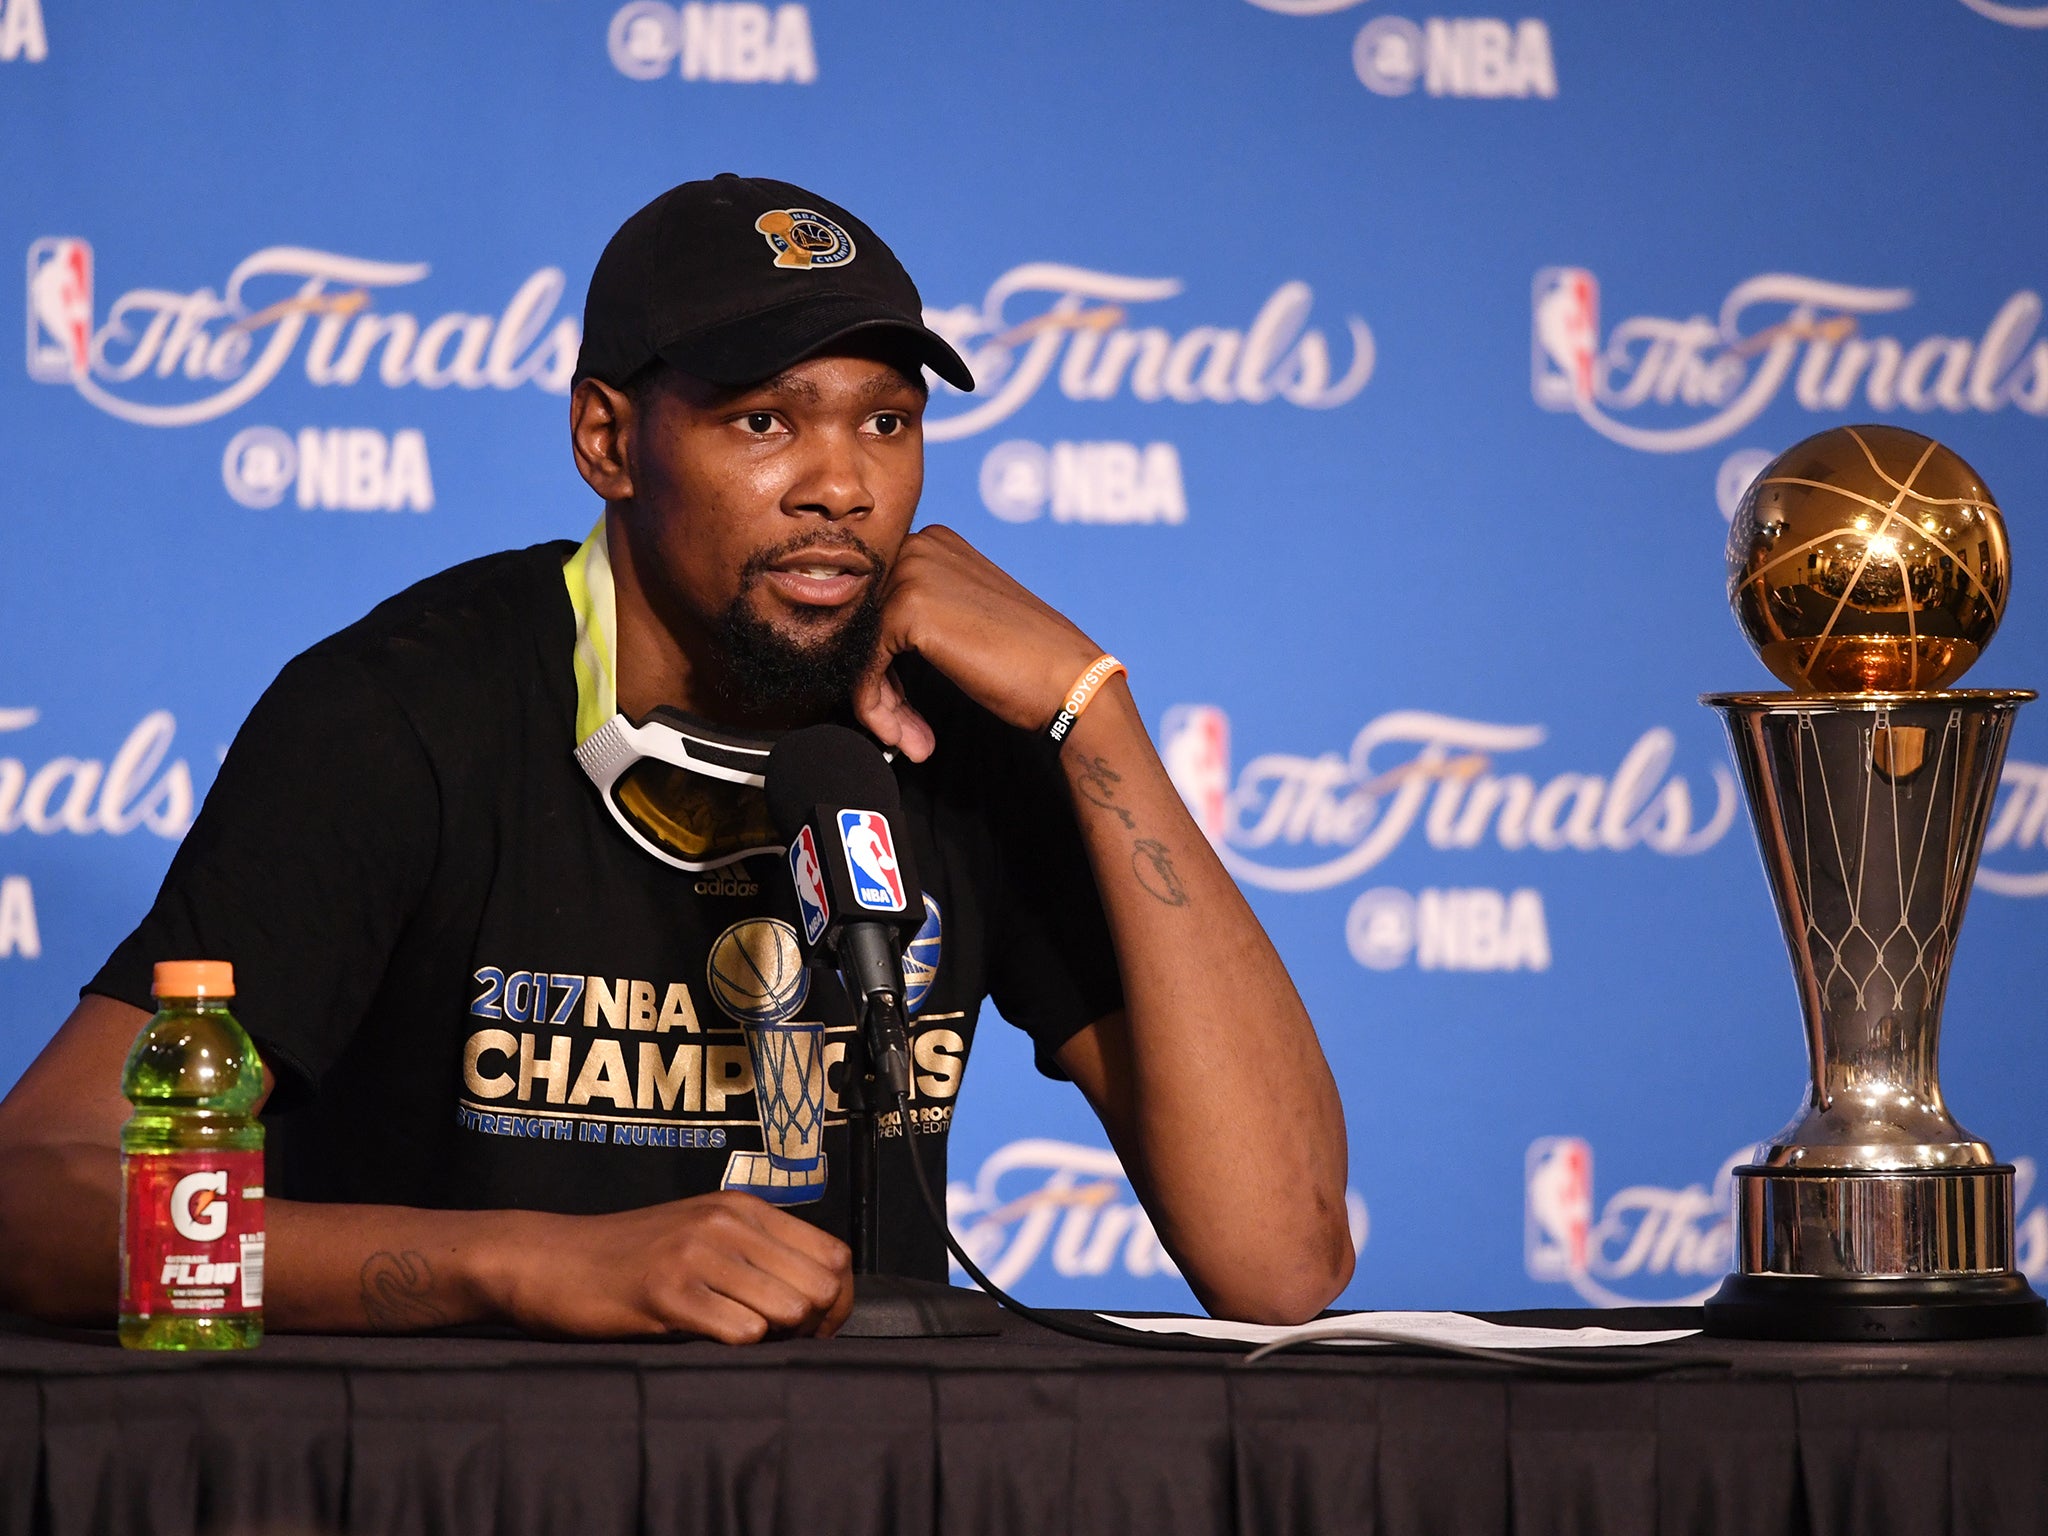 Kevin Durant will reject any invite from Donald Trump to attend the White House